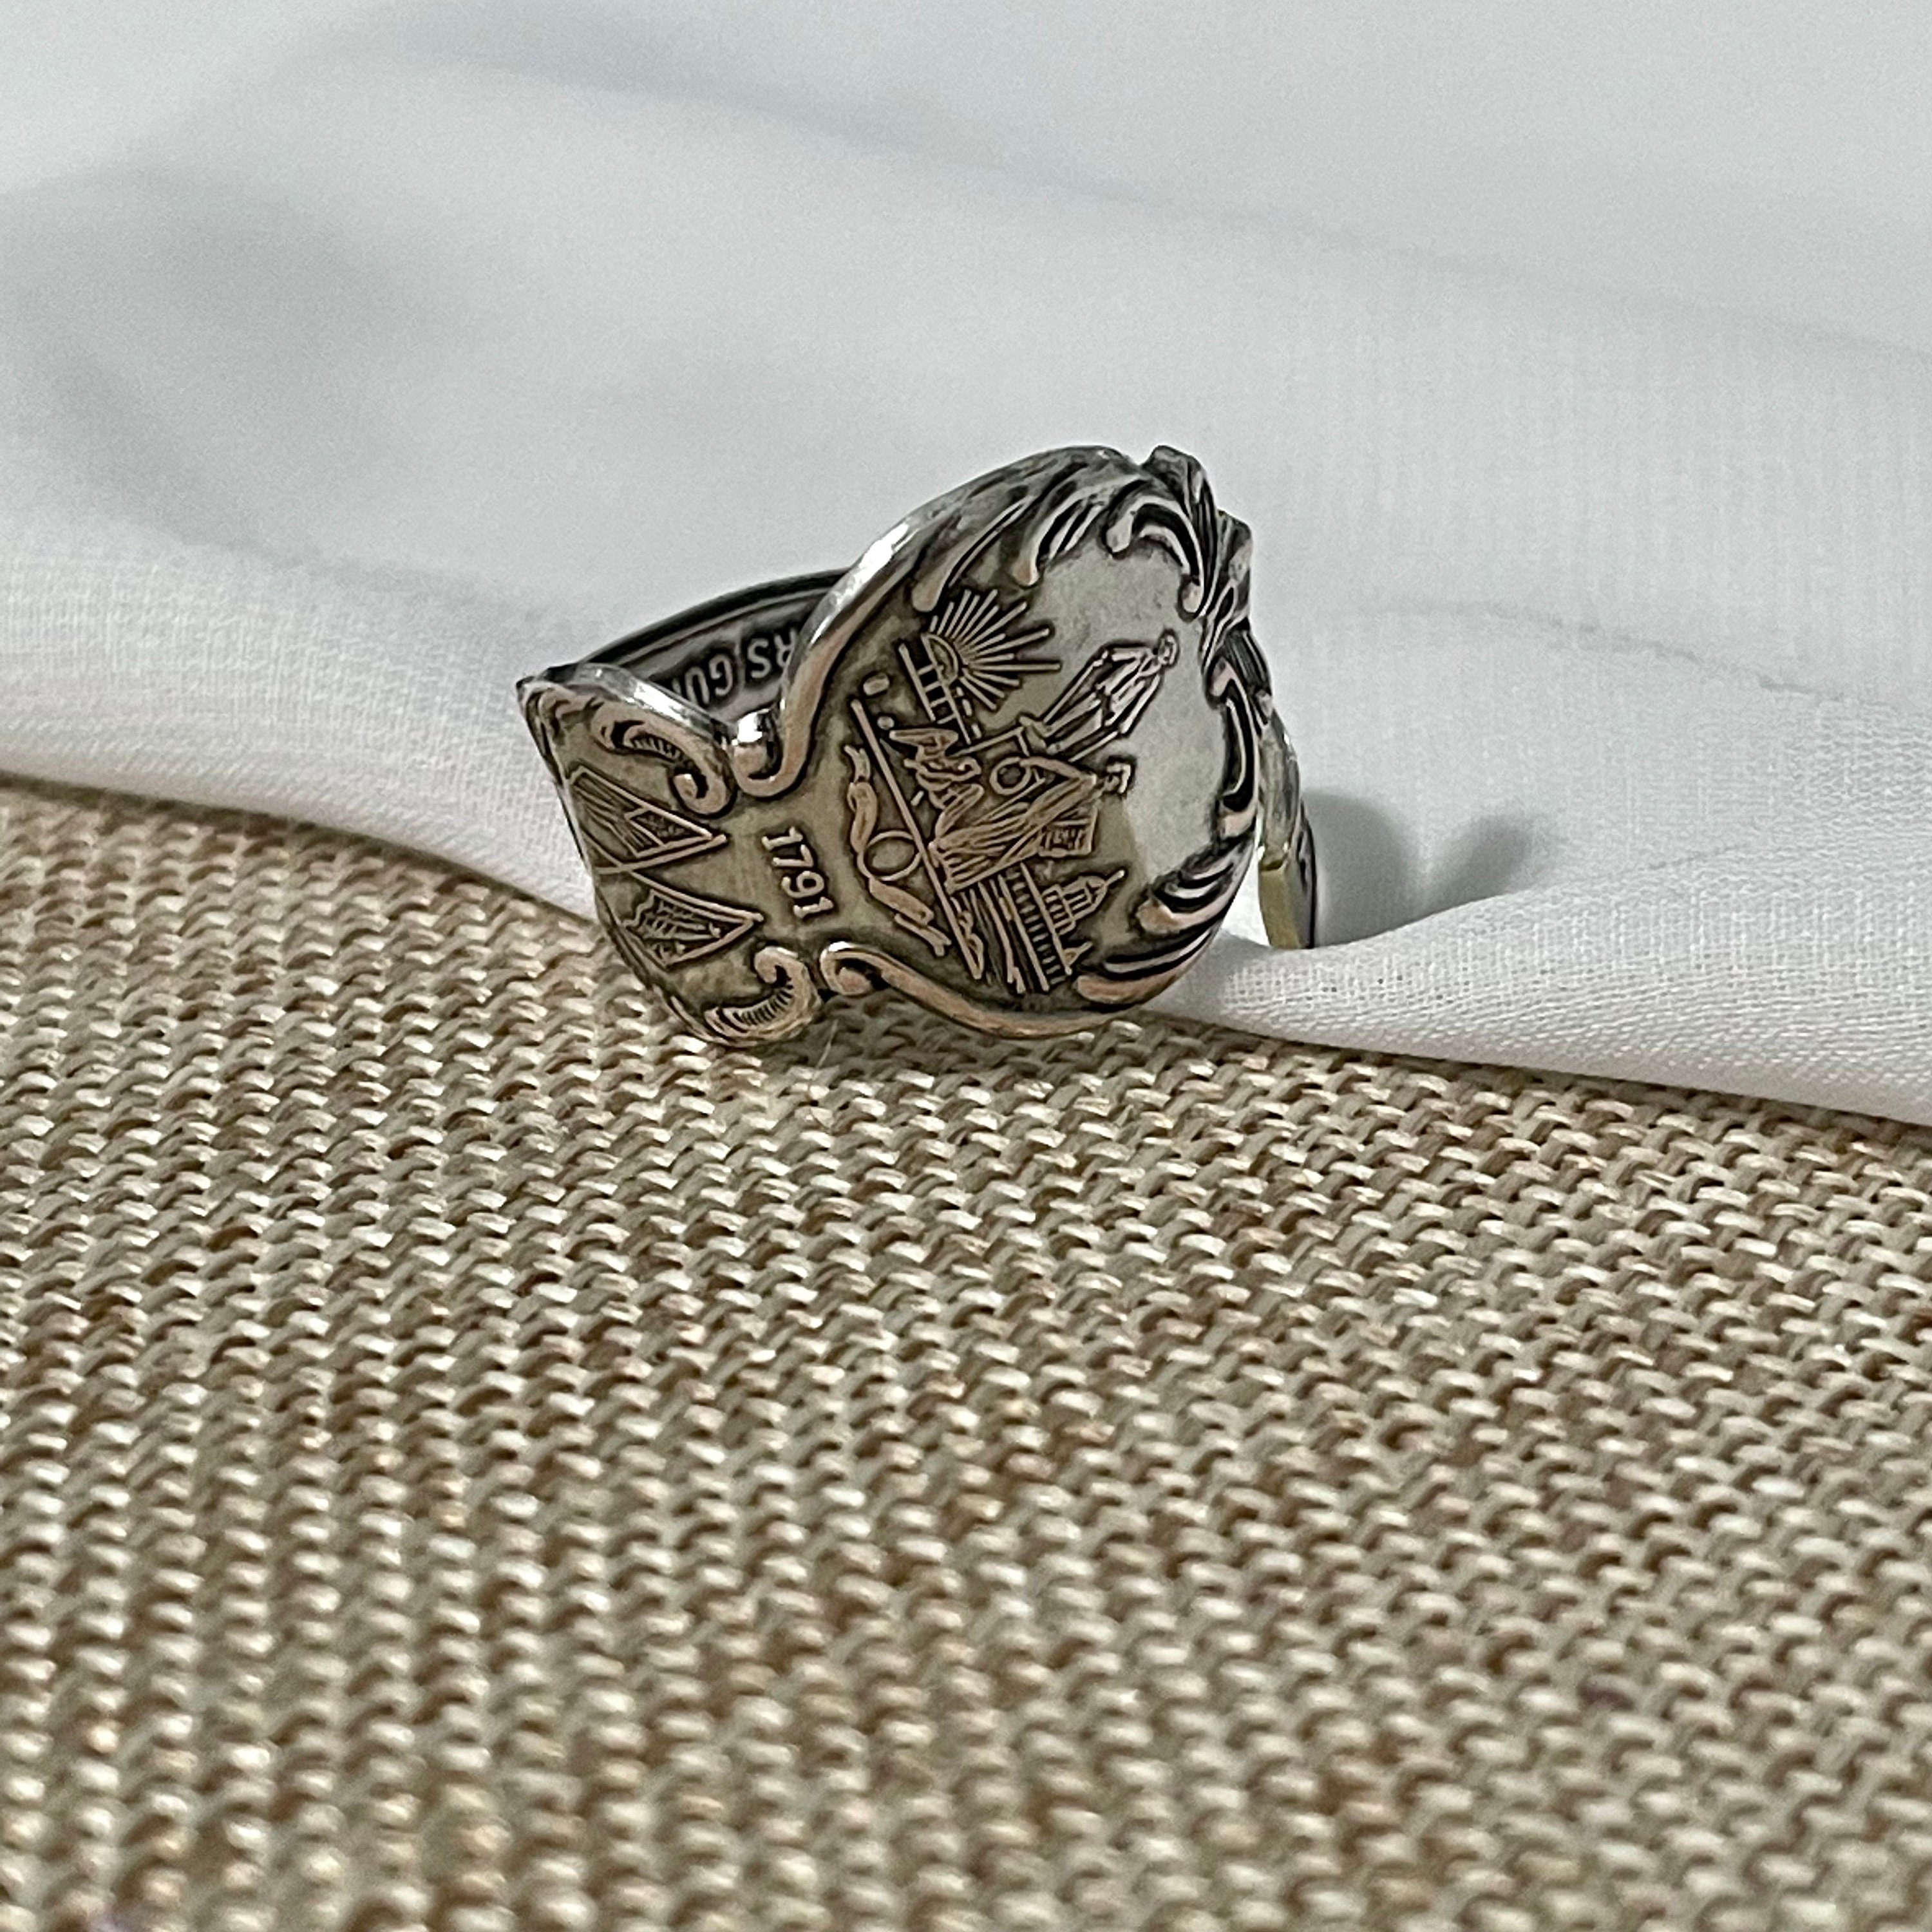 Antique Spoon Ring - Etsy